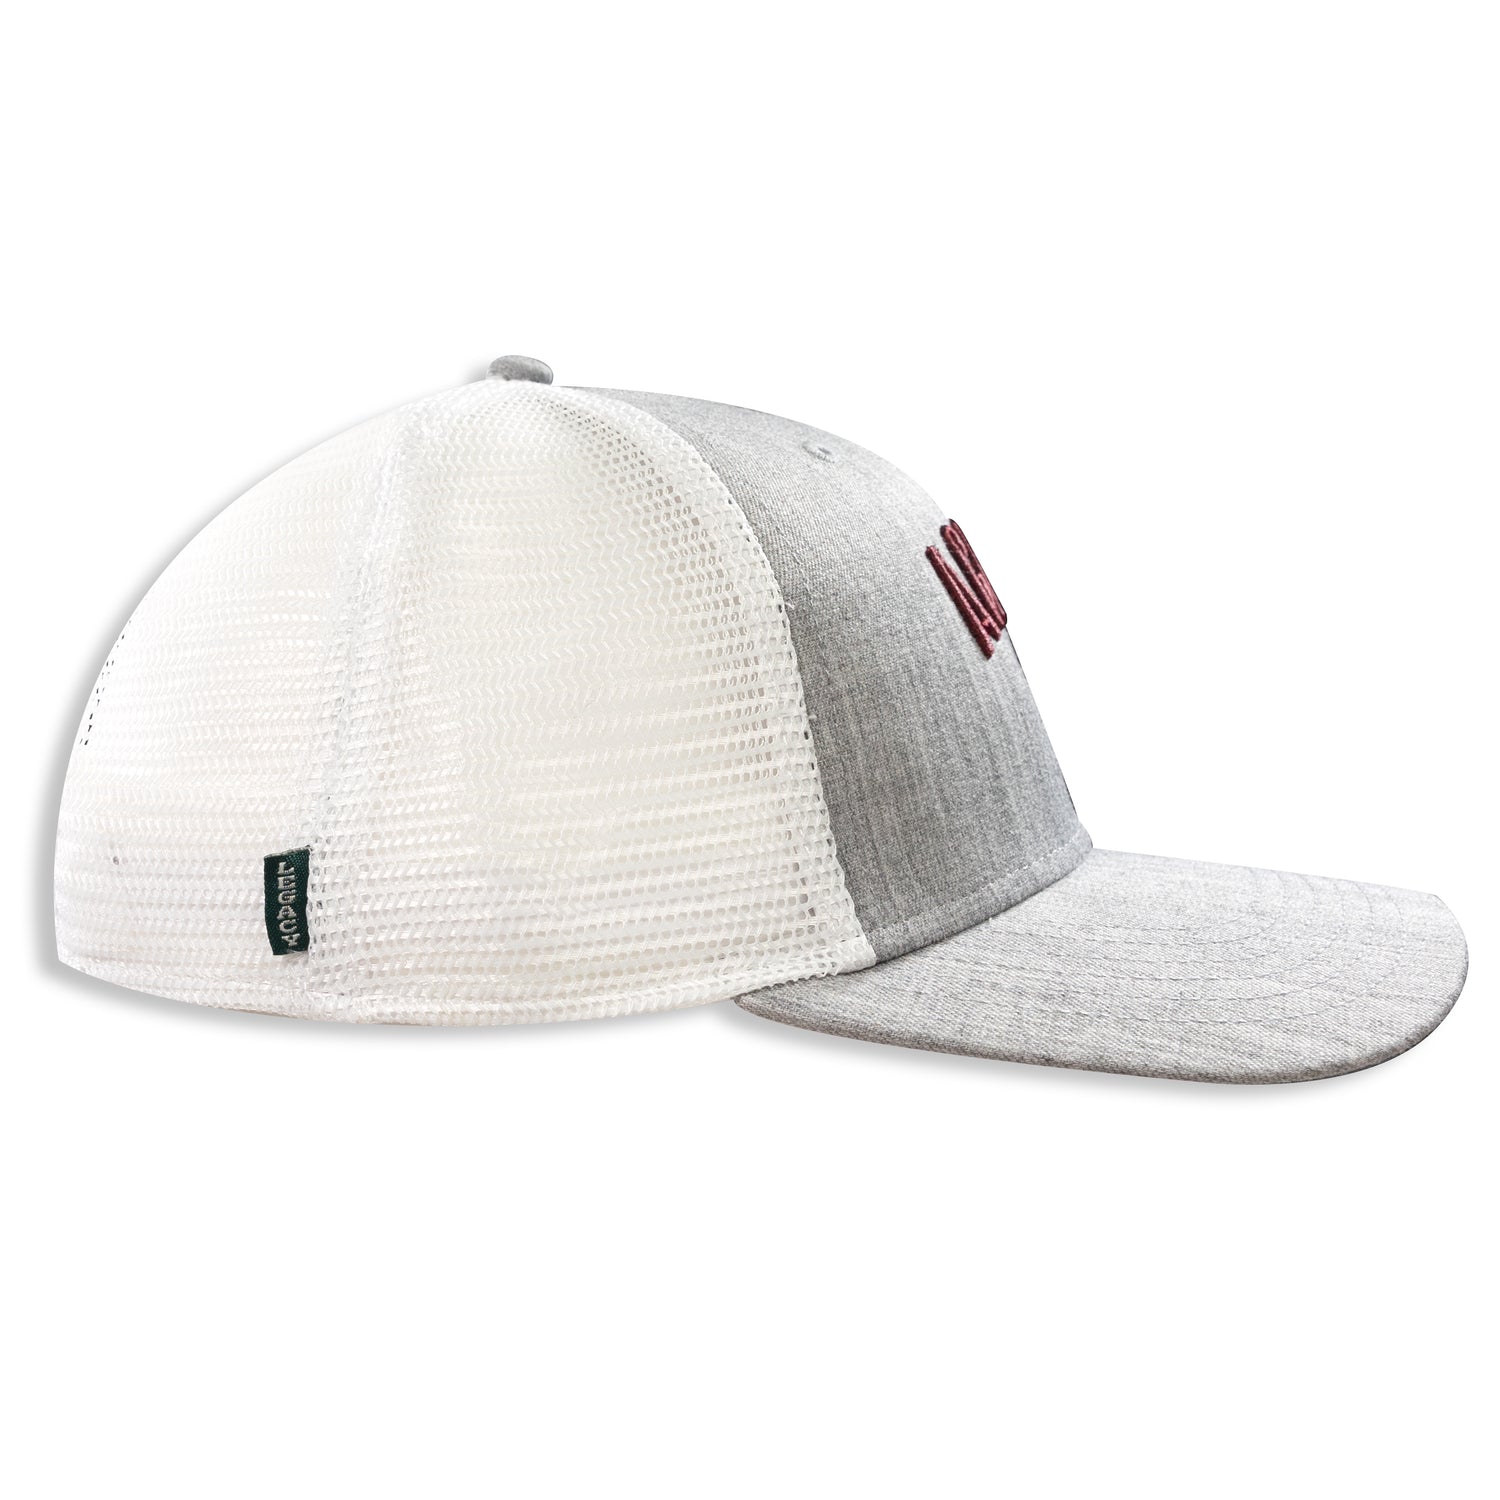 Mid Pro Texas A&M Arch Hat